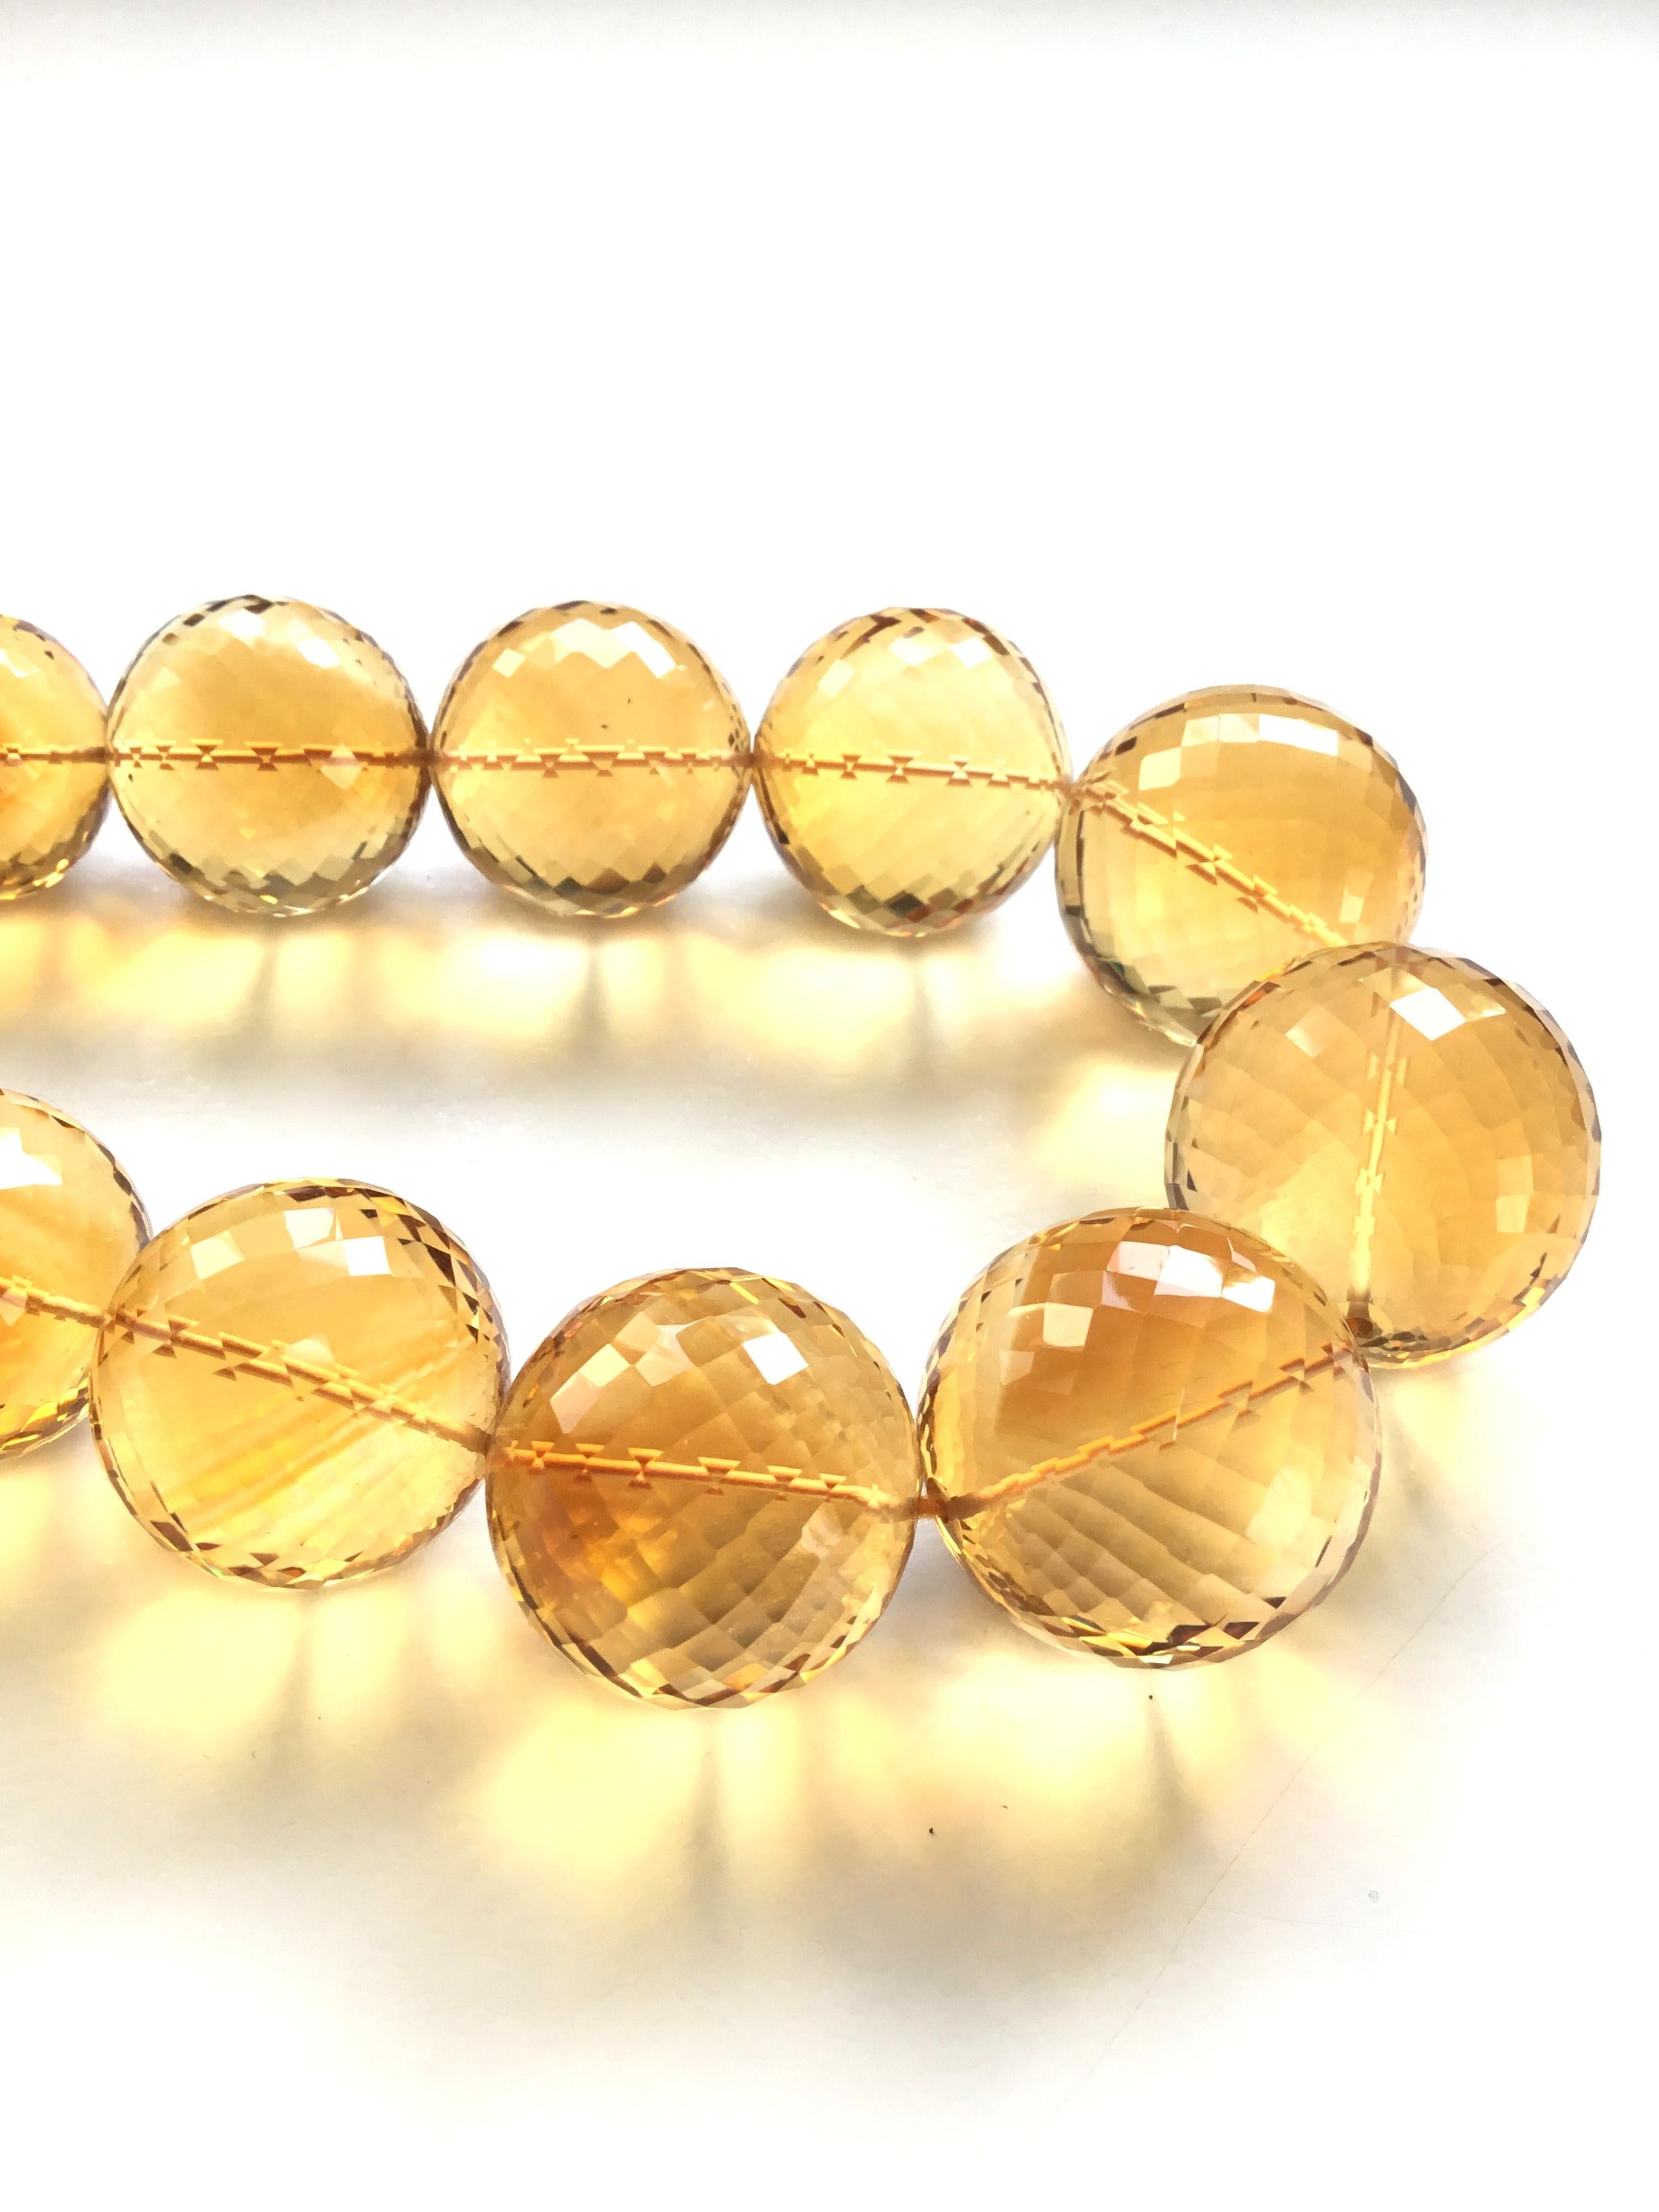 Top Quality Citrine Faceted balls Natural Gemstone Necklace 
Weight - 1540.80 Ct 
Size - 18 x 27 MM
Quantity - 1

Citrine Top Quality Faceted Beaded Necklace ...............
